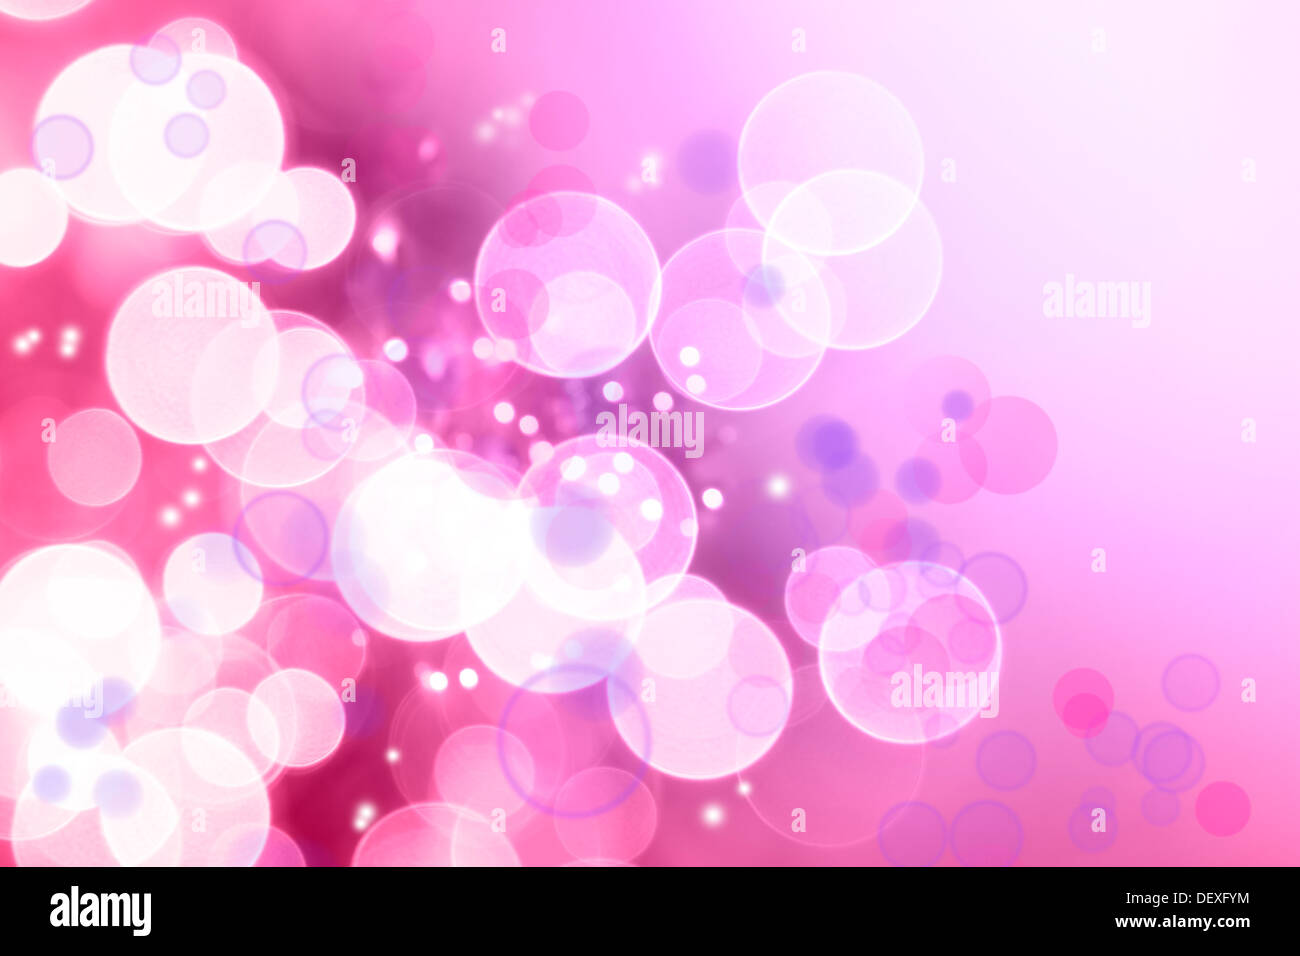 Abstract pink tone lights background Stock Photo